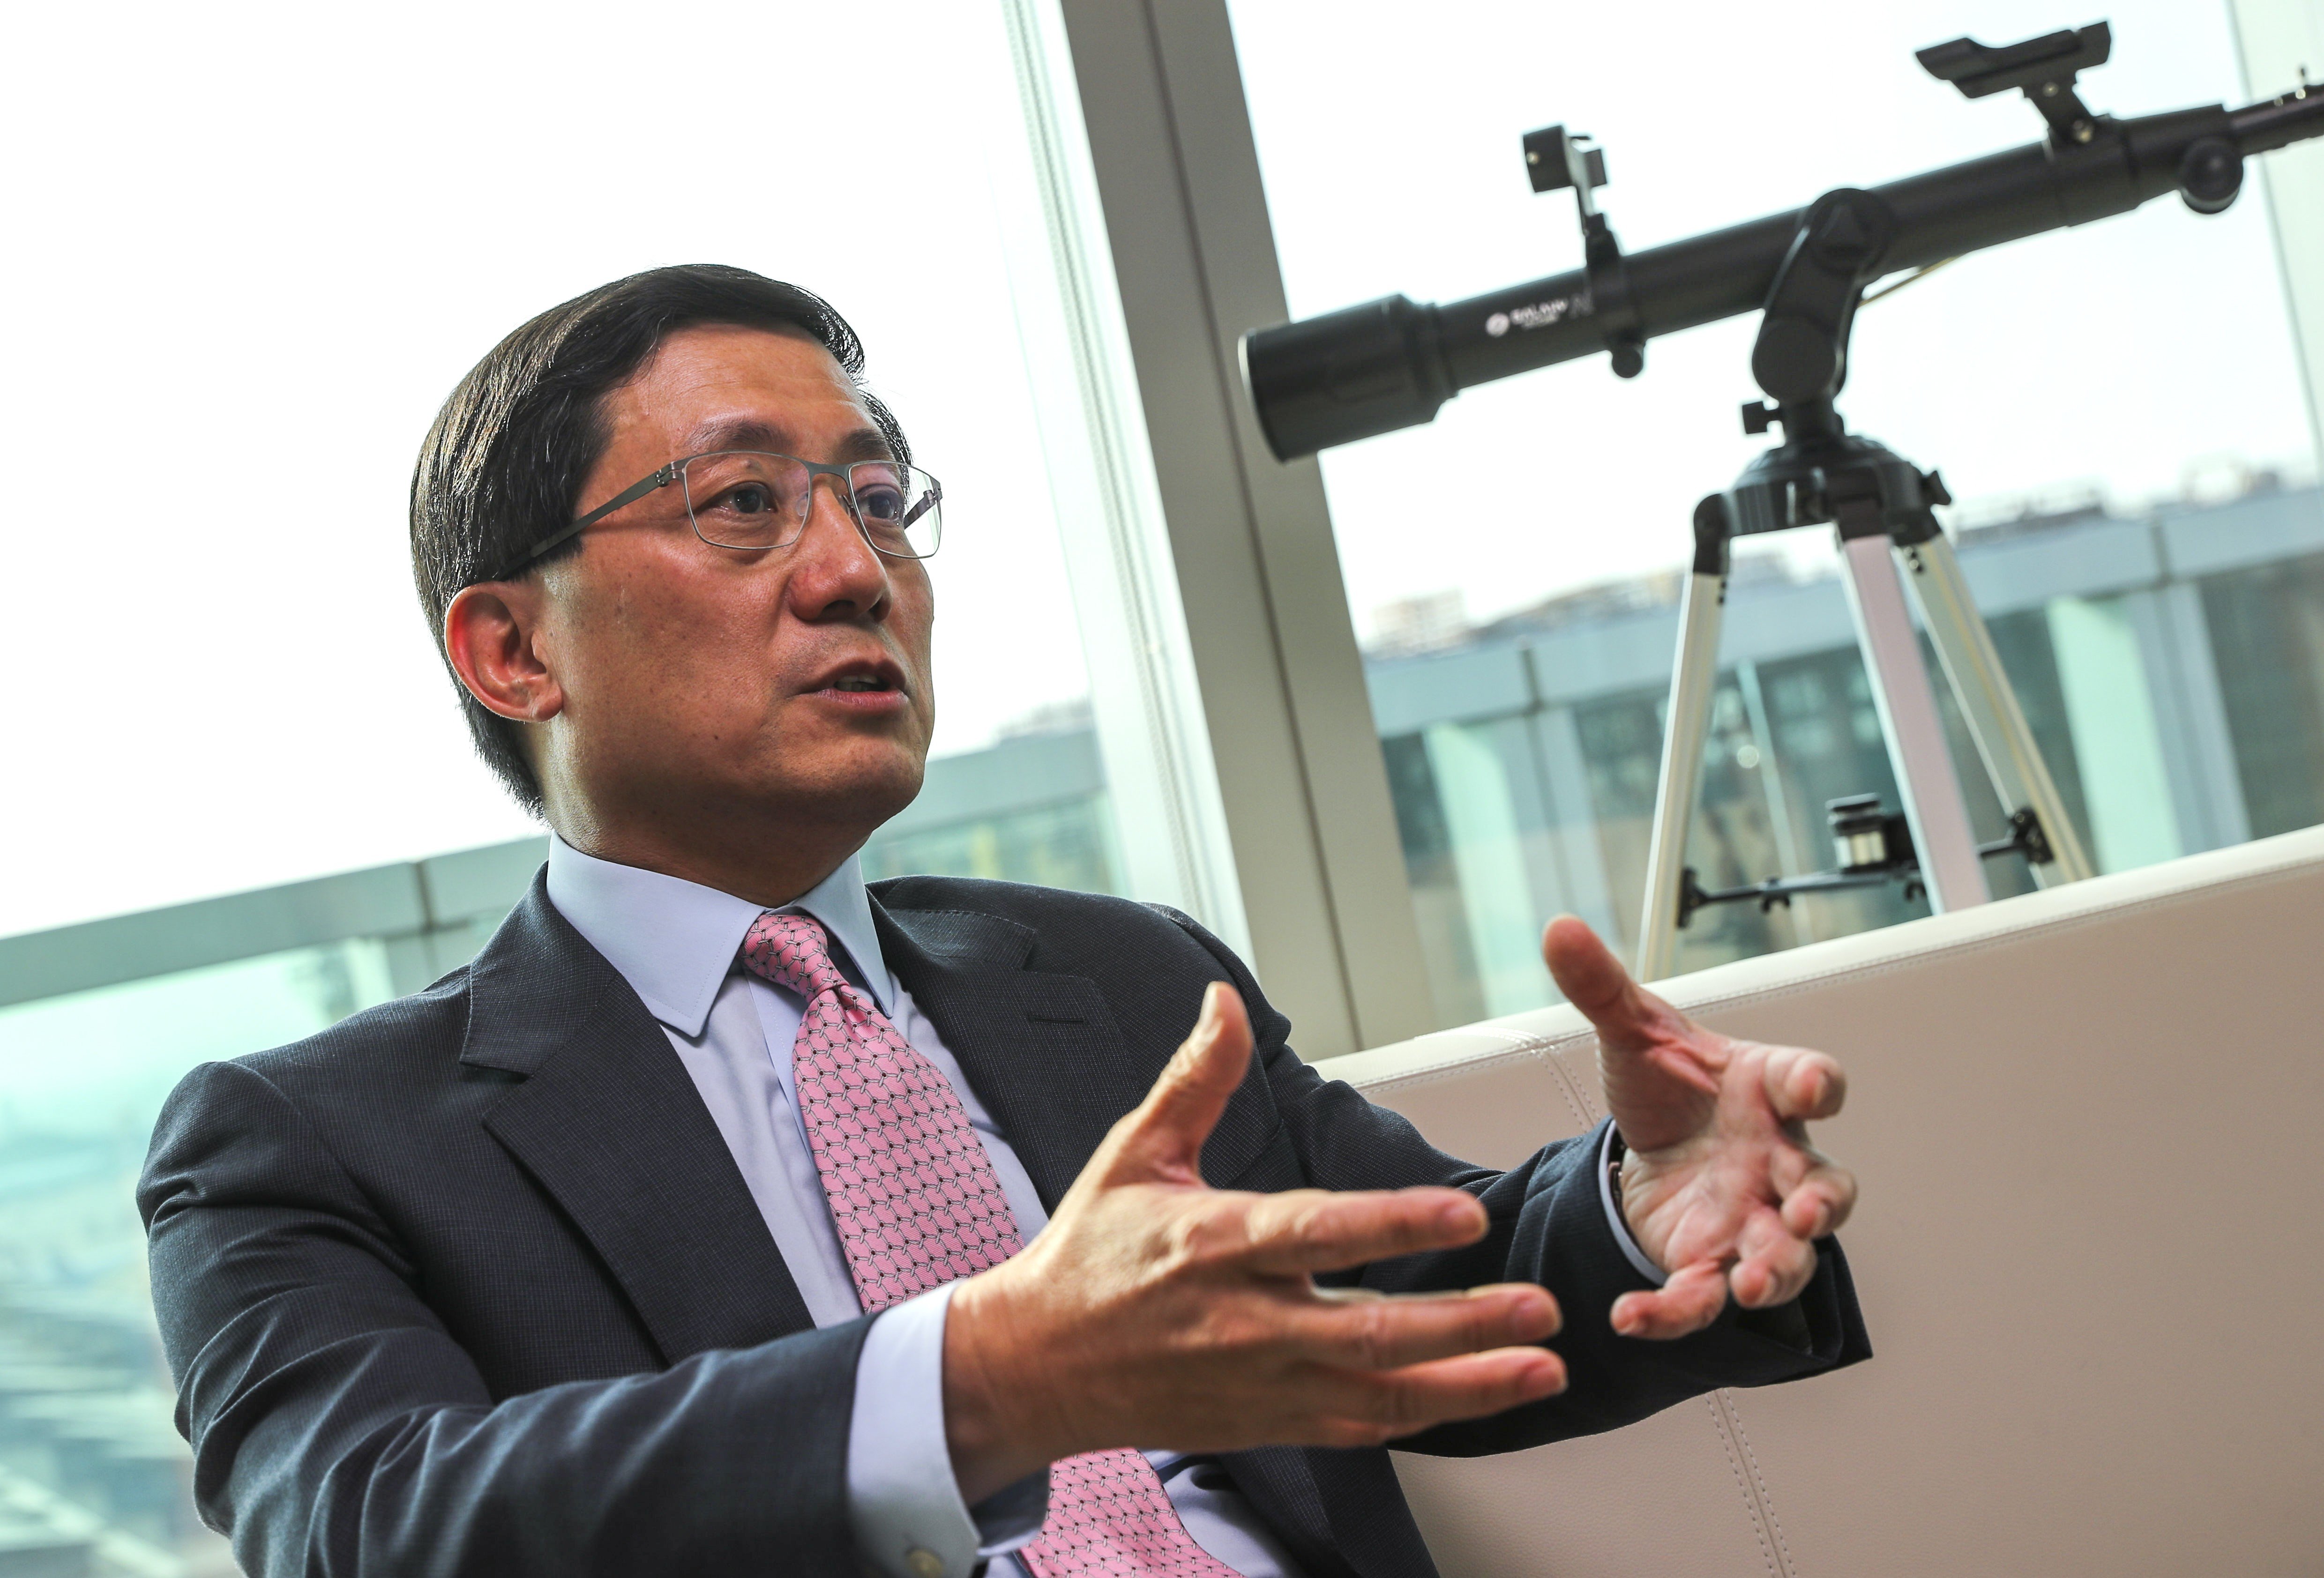 Interview with Fred Lam, Chief Executive Officer of Hong Kong Airport Authority, at the Hong Kong International Airport in Chek Lap Kok. Photo: Edward Wong